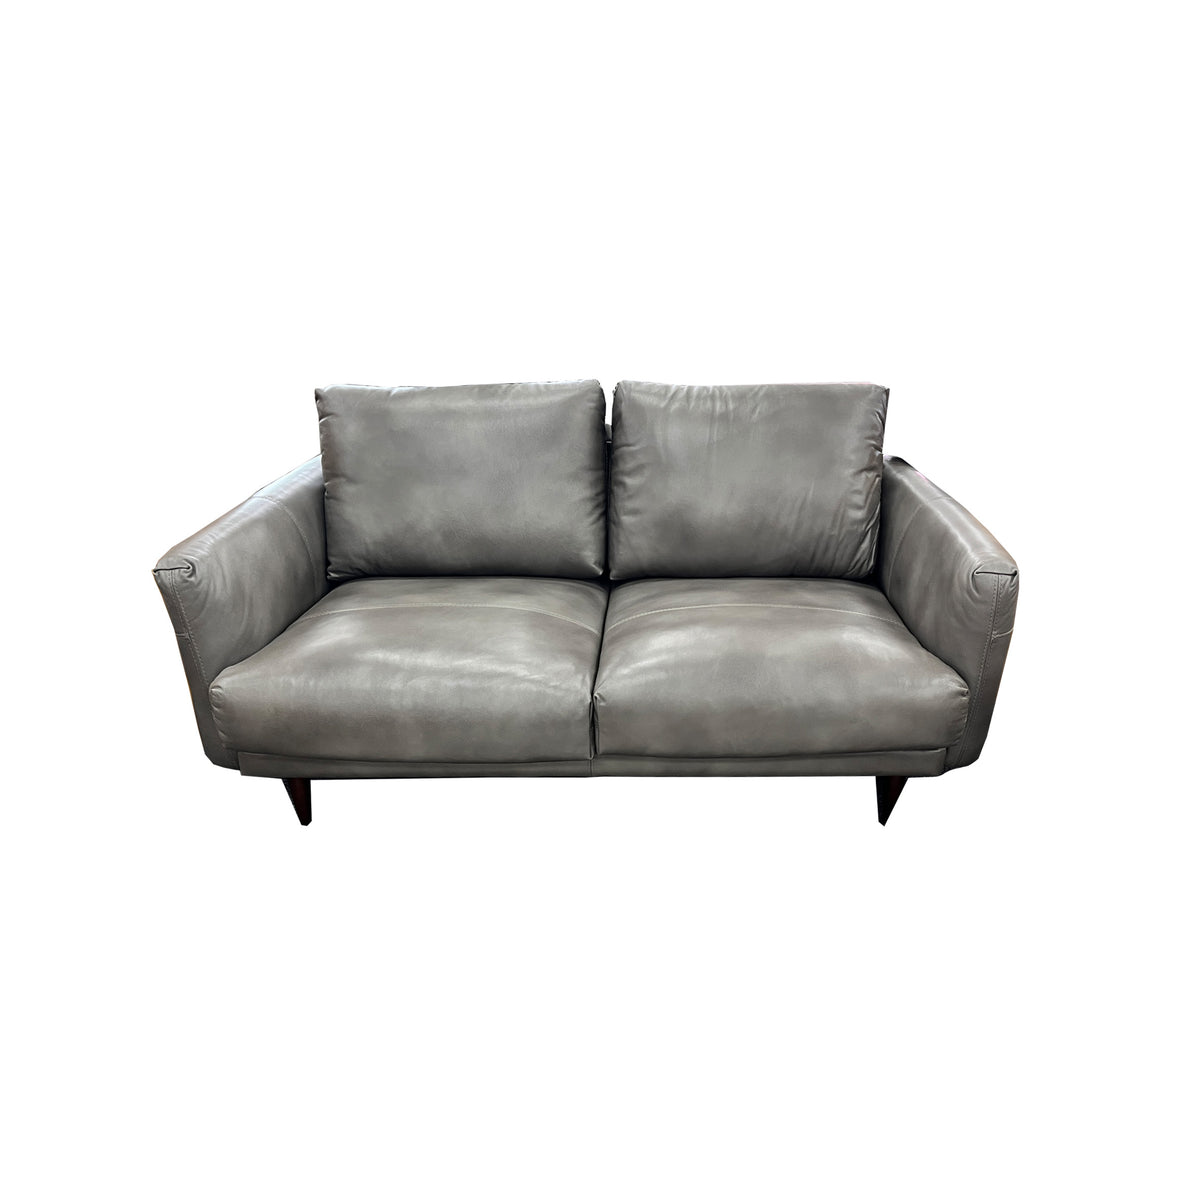 Gatsby 2 Seater Leather Sofa